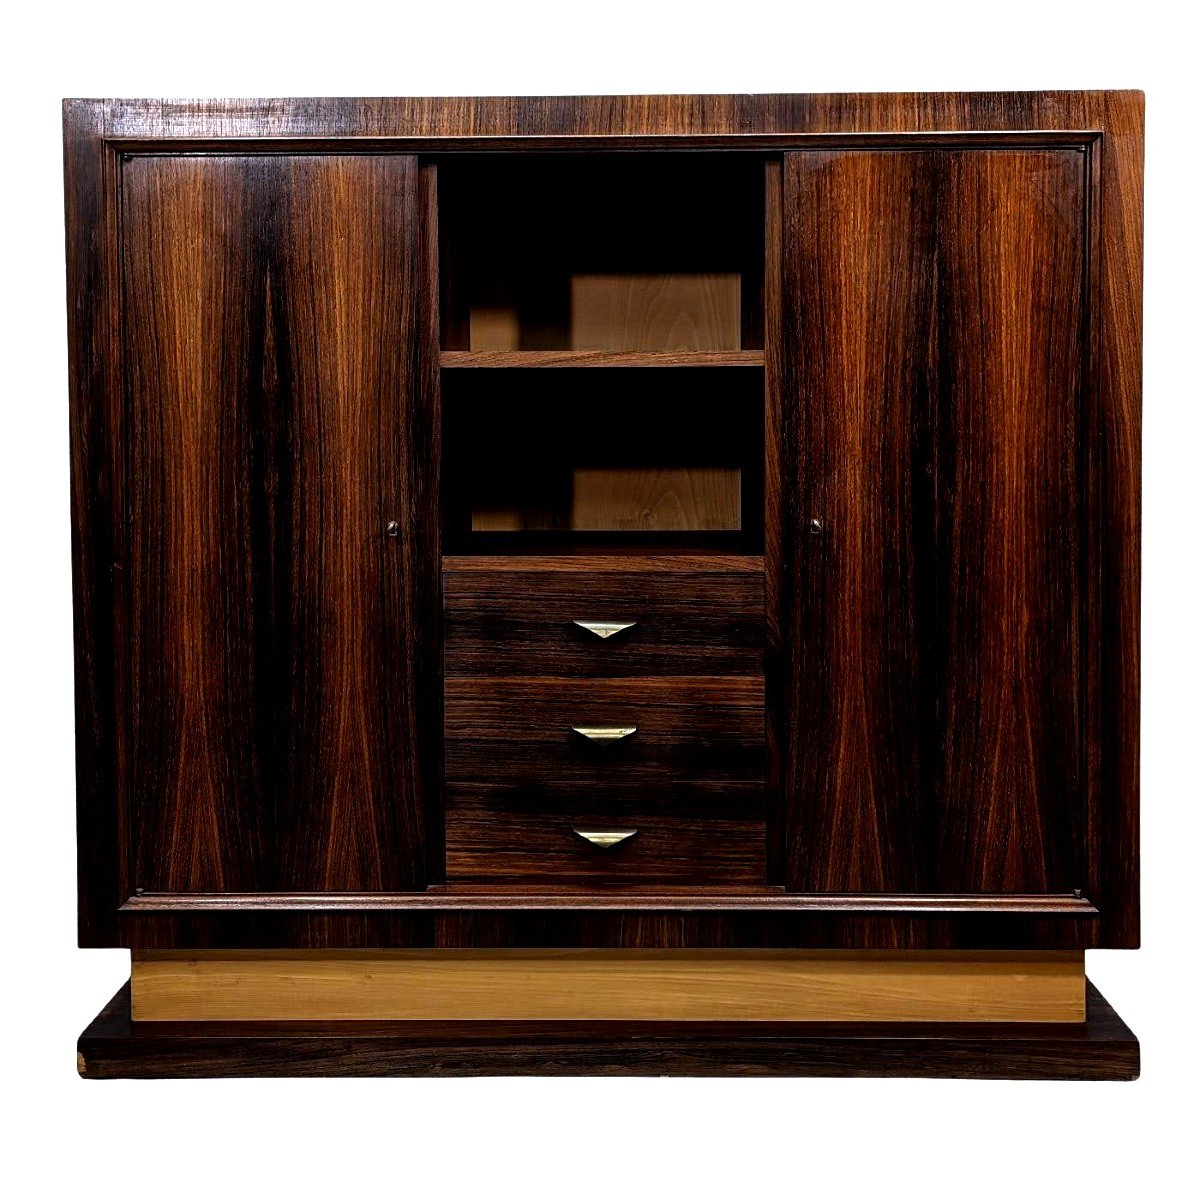 Art Deco Style Bookcase 1930 From 1950 Period In Rosewood Brass Handles